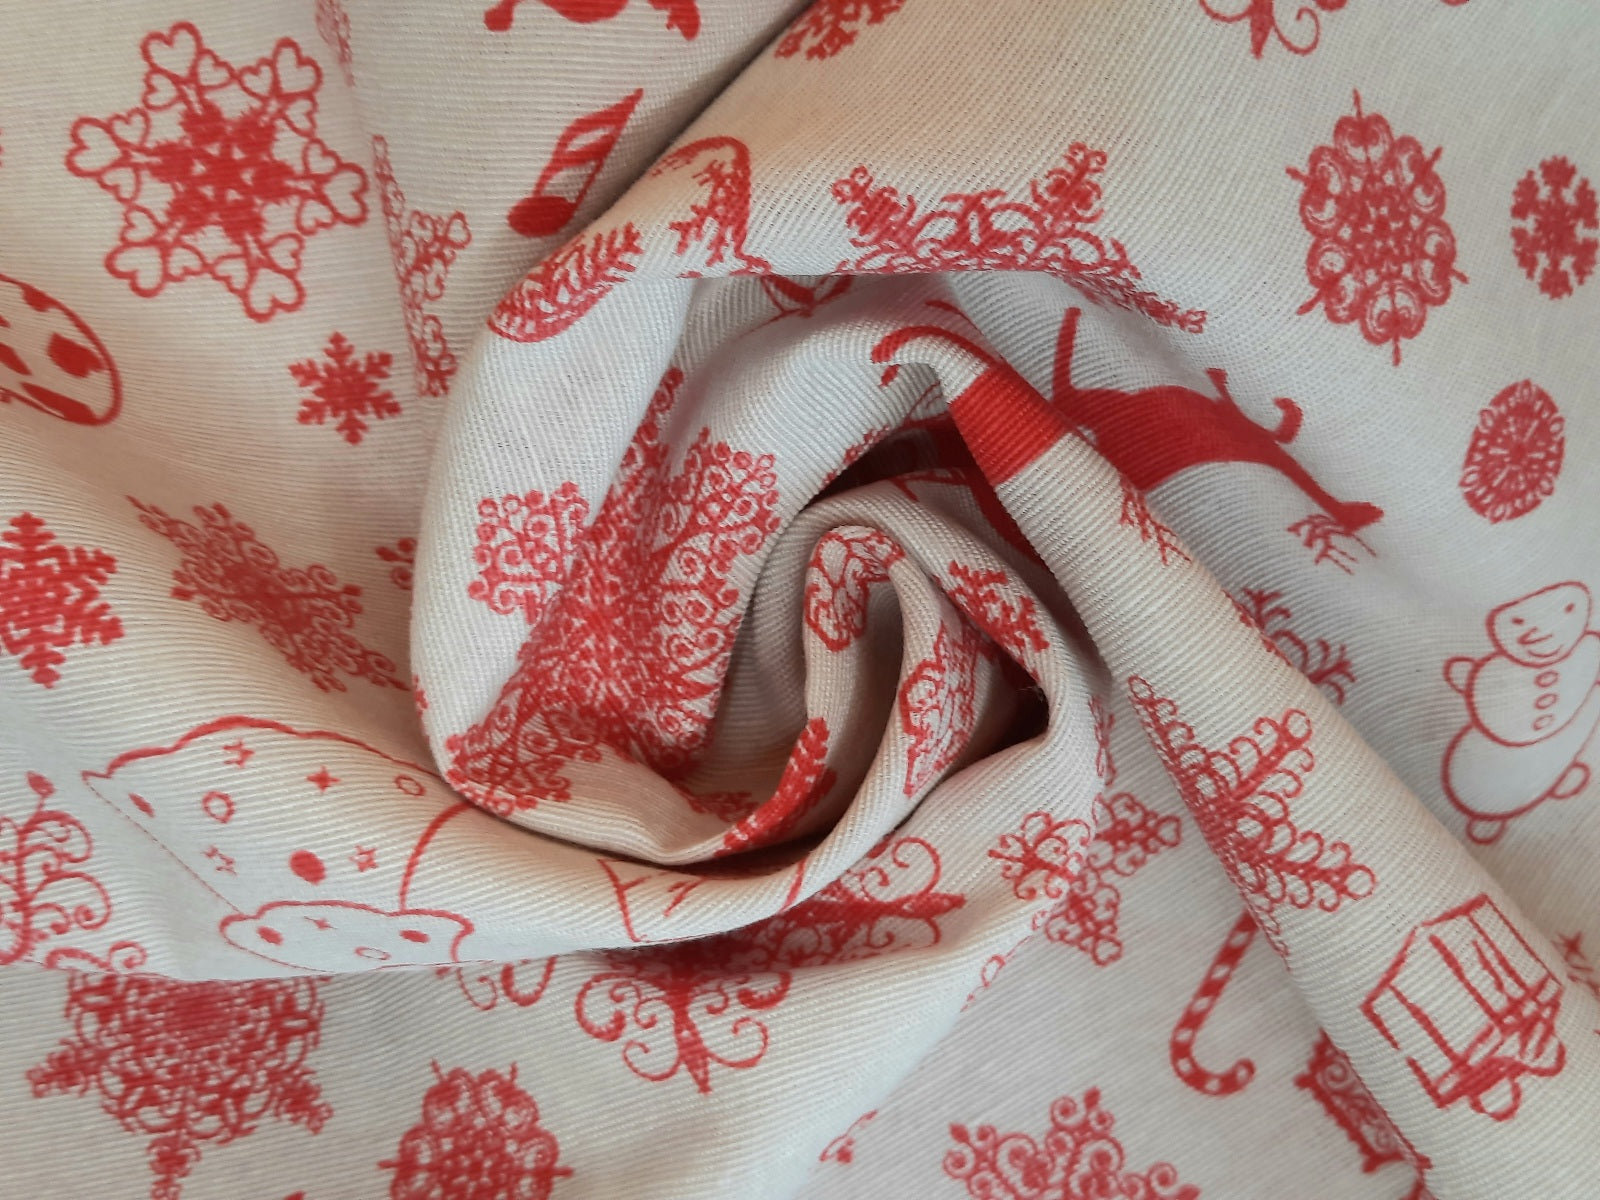 Christmas decorative fabric * From 50 cm  - 0